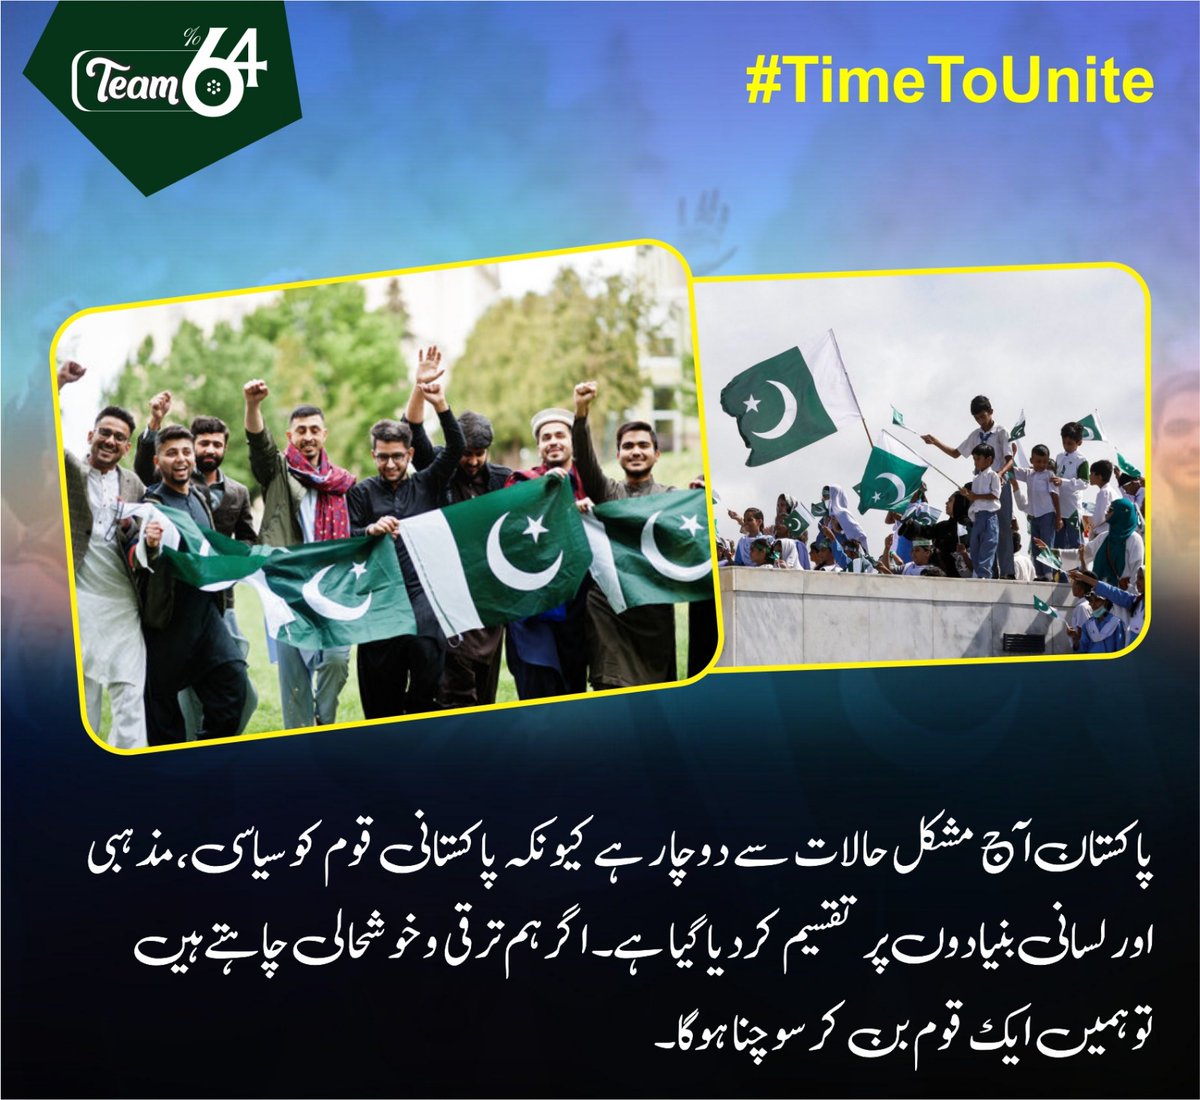 Our shared obligation is to construct a society where justice prevails, the rule of law is honored, and every individual is granted equal opportunities. This can only be accomplished by coming together and working in unison towards this common goal.

#TimeToUnite